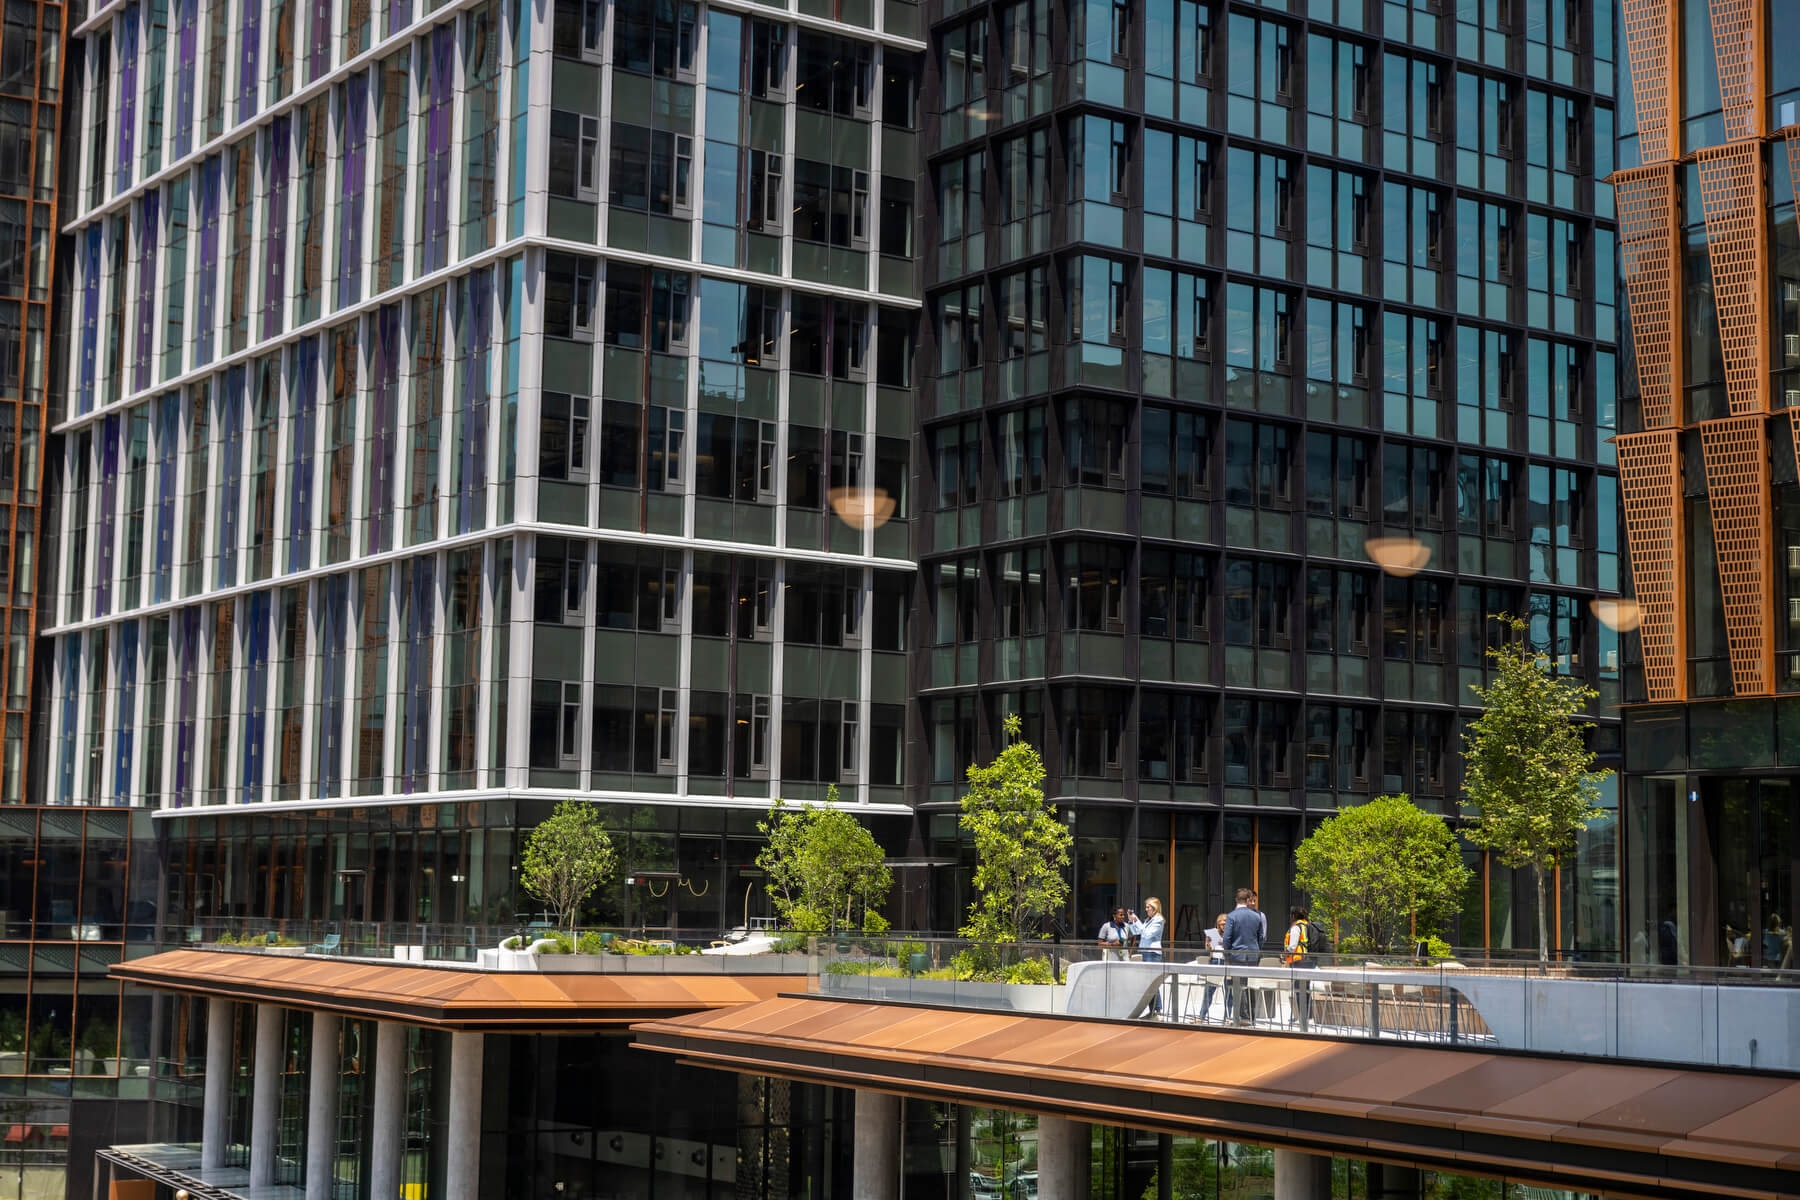 An image of the terrace at Amazon's HQ2 Met Park building